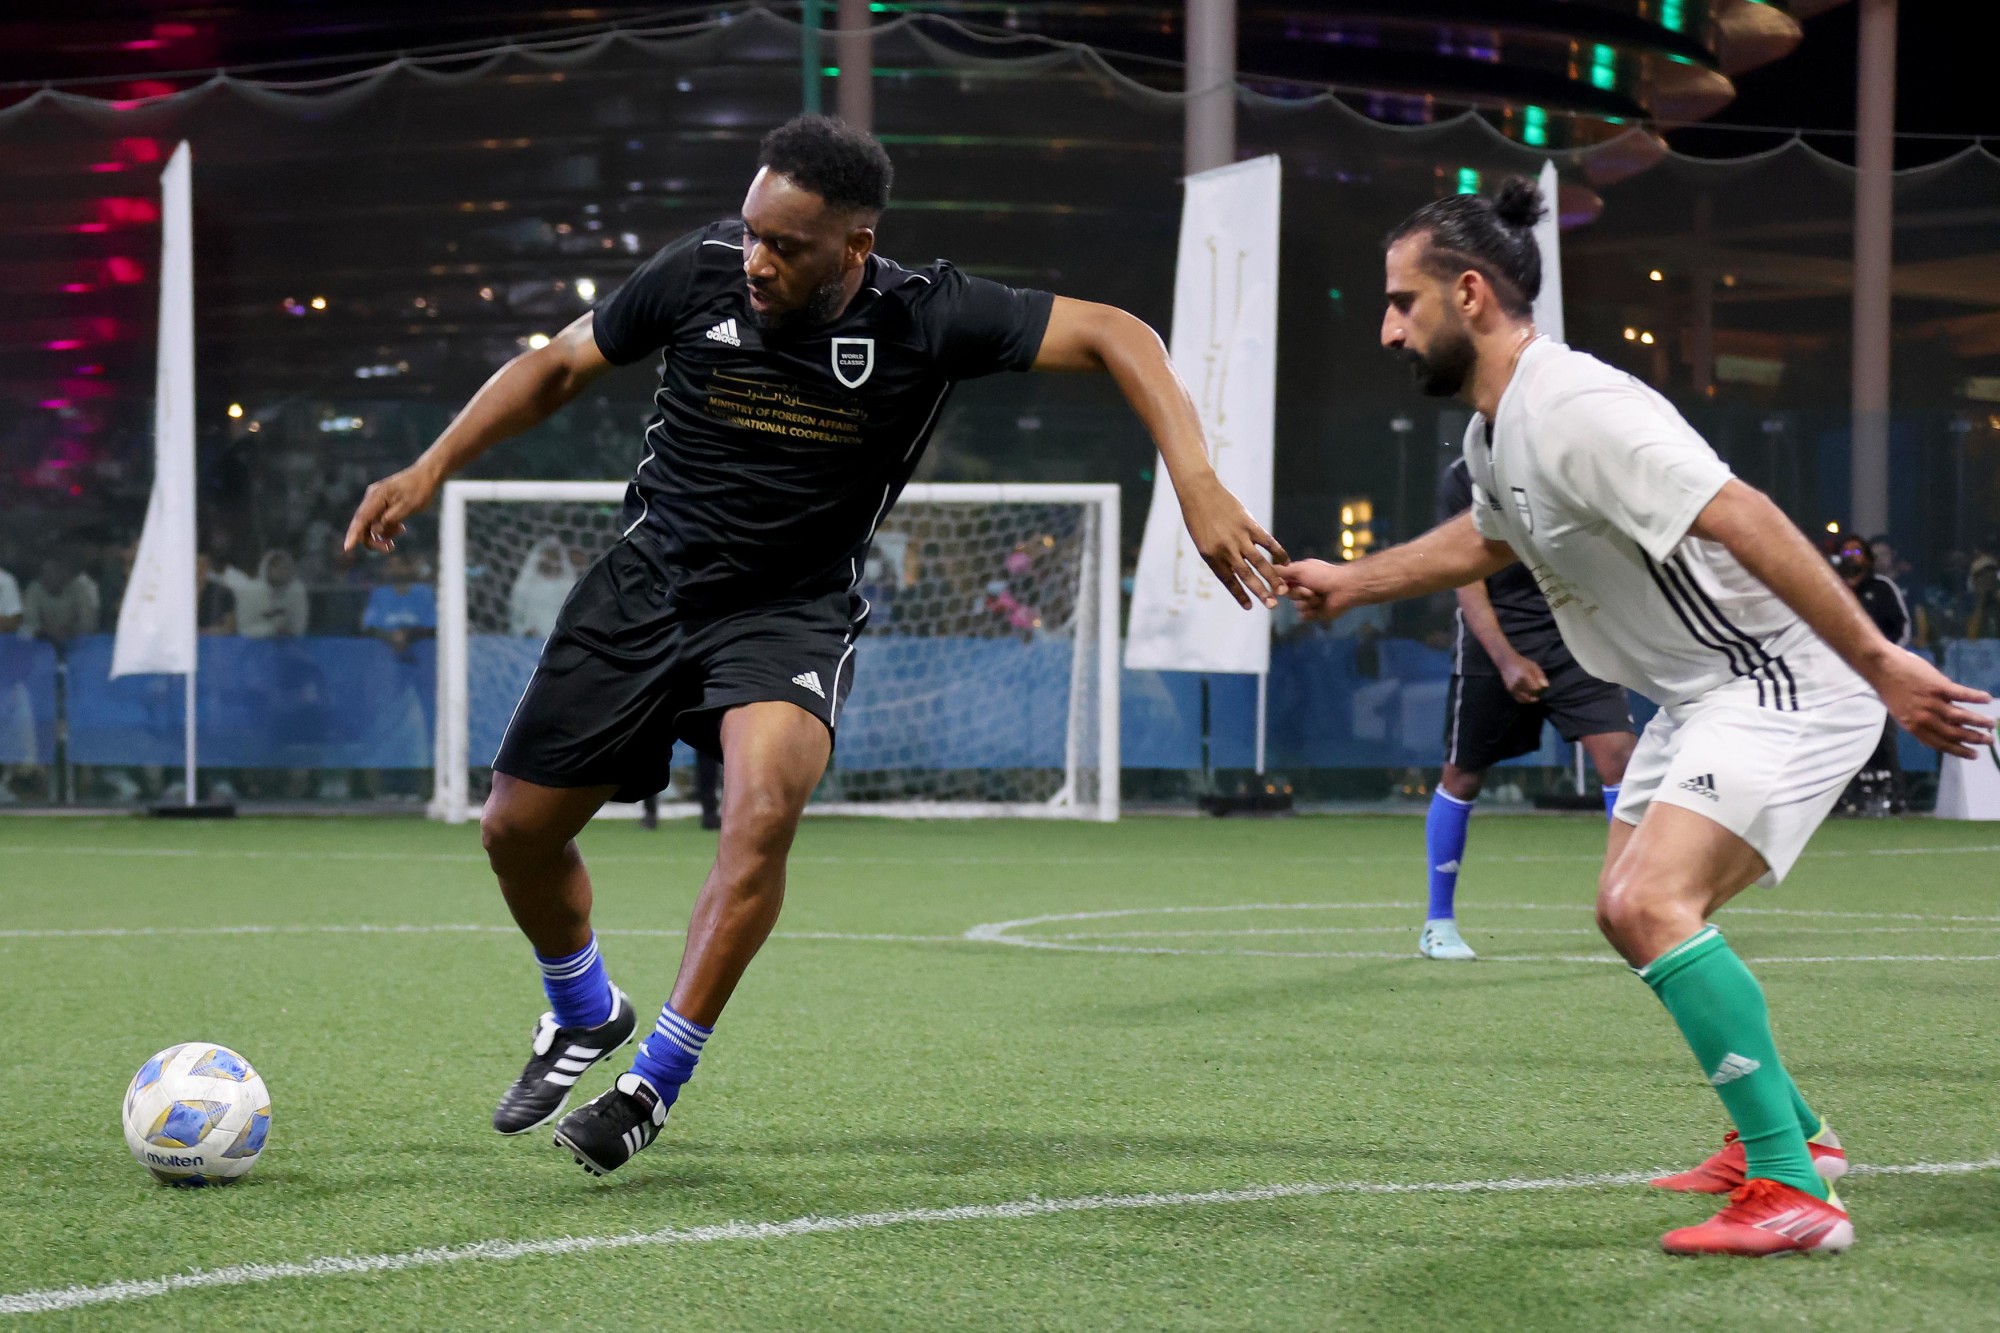 Nigerian former footballer and World Classic team member Jay Jay Okocha (L) in action during an exhibition match against the Abraham Accords team for the Abraham Accords Games at the Sports, Fitness and Wellbeing Hub m70770